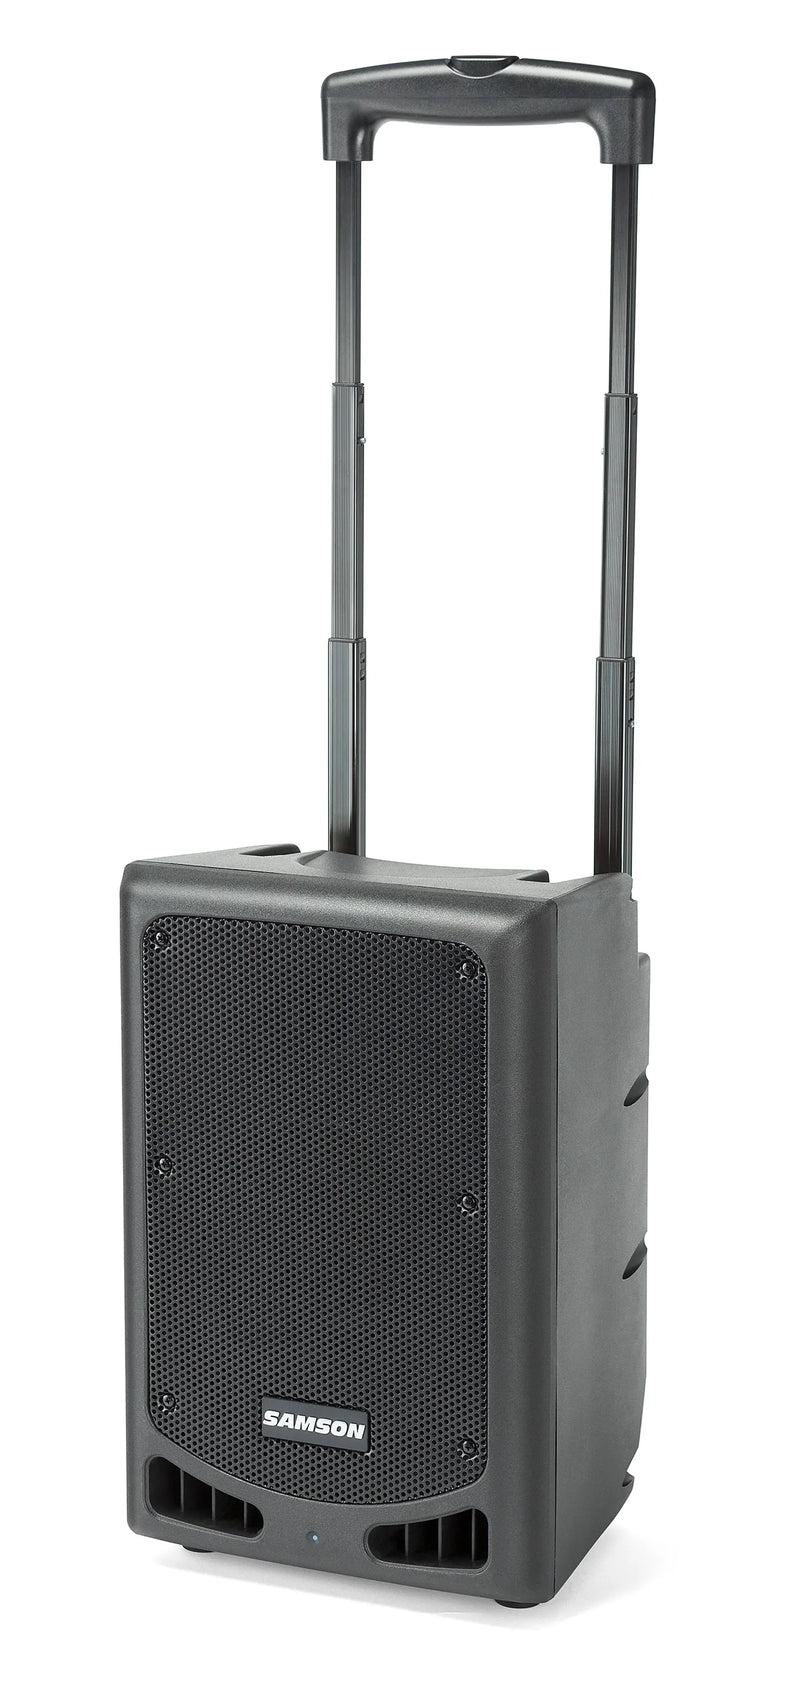 SAMSON EXPEDITION XP208W RECHARGEABLE PORTABLE PA SYSTEM